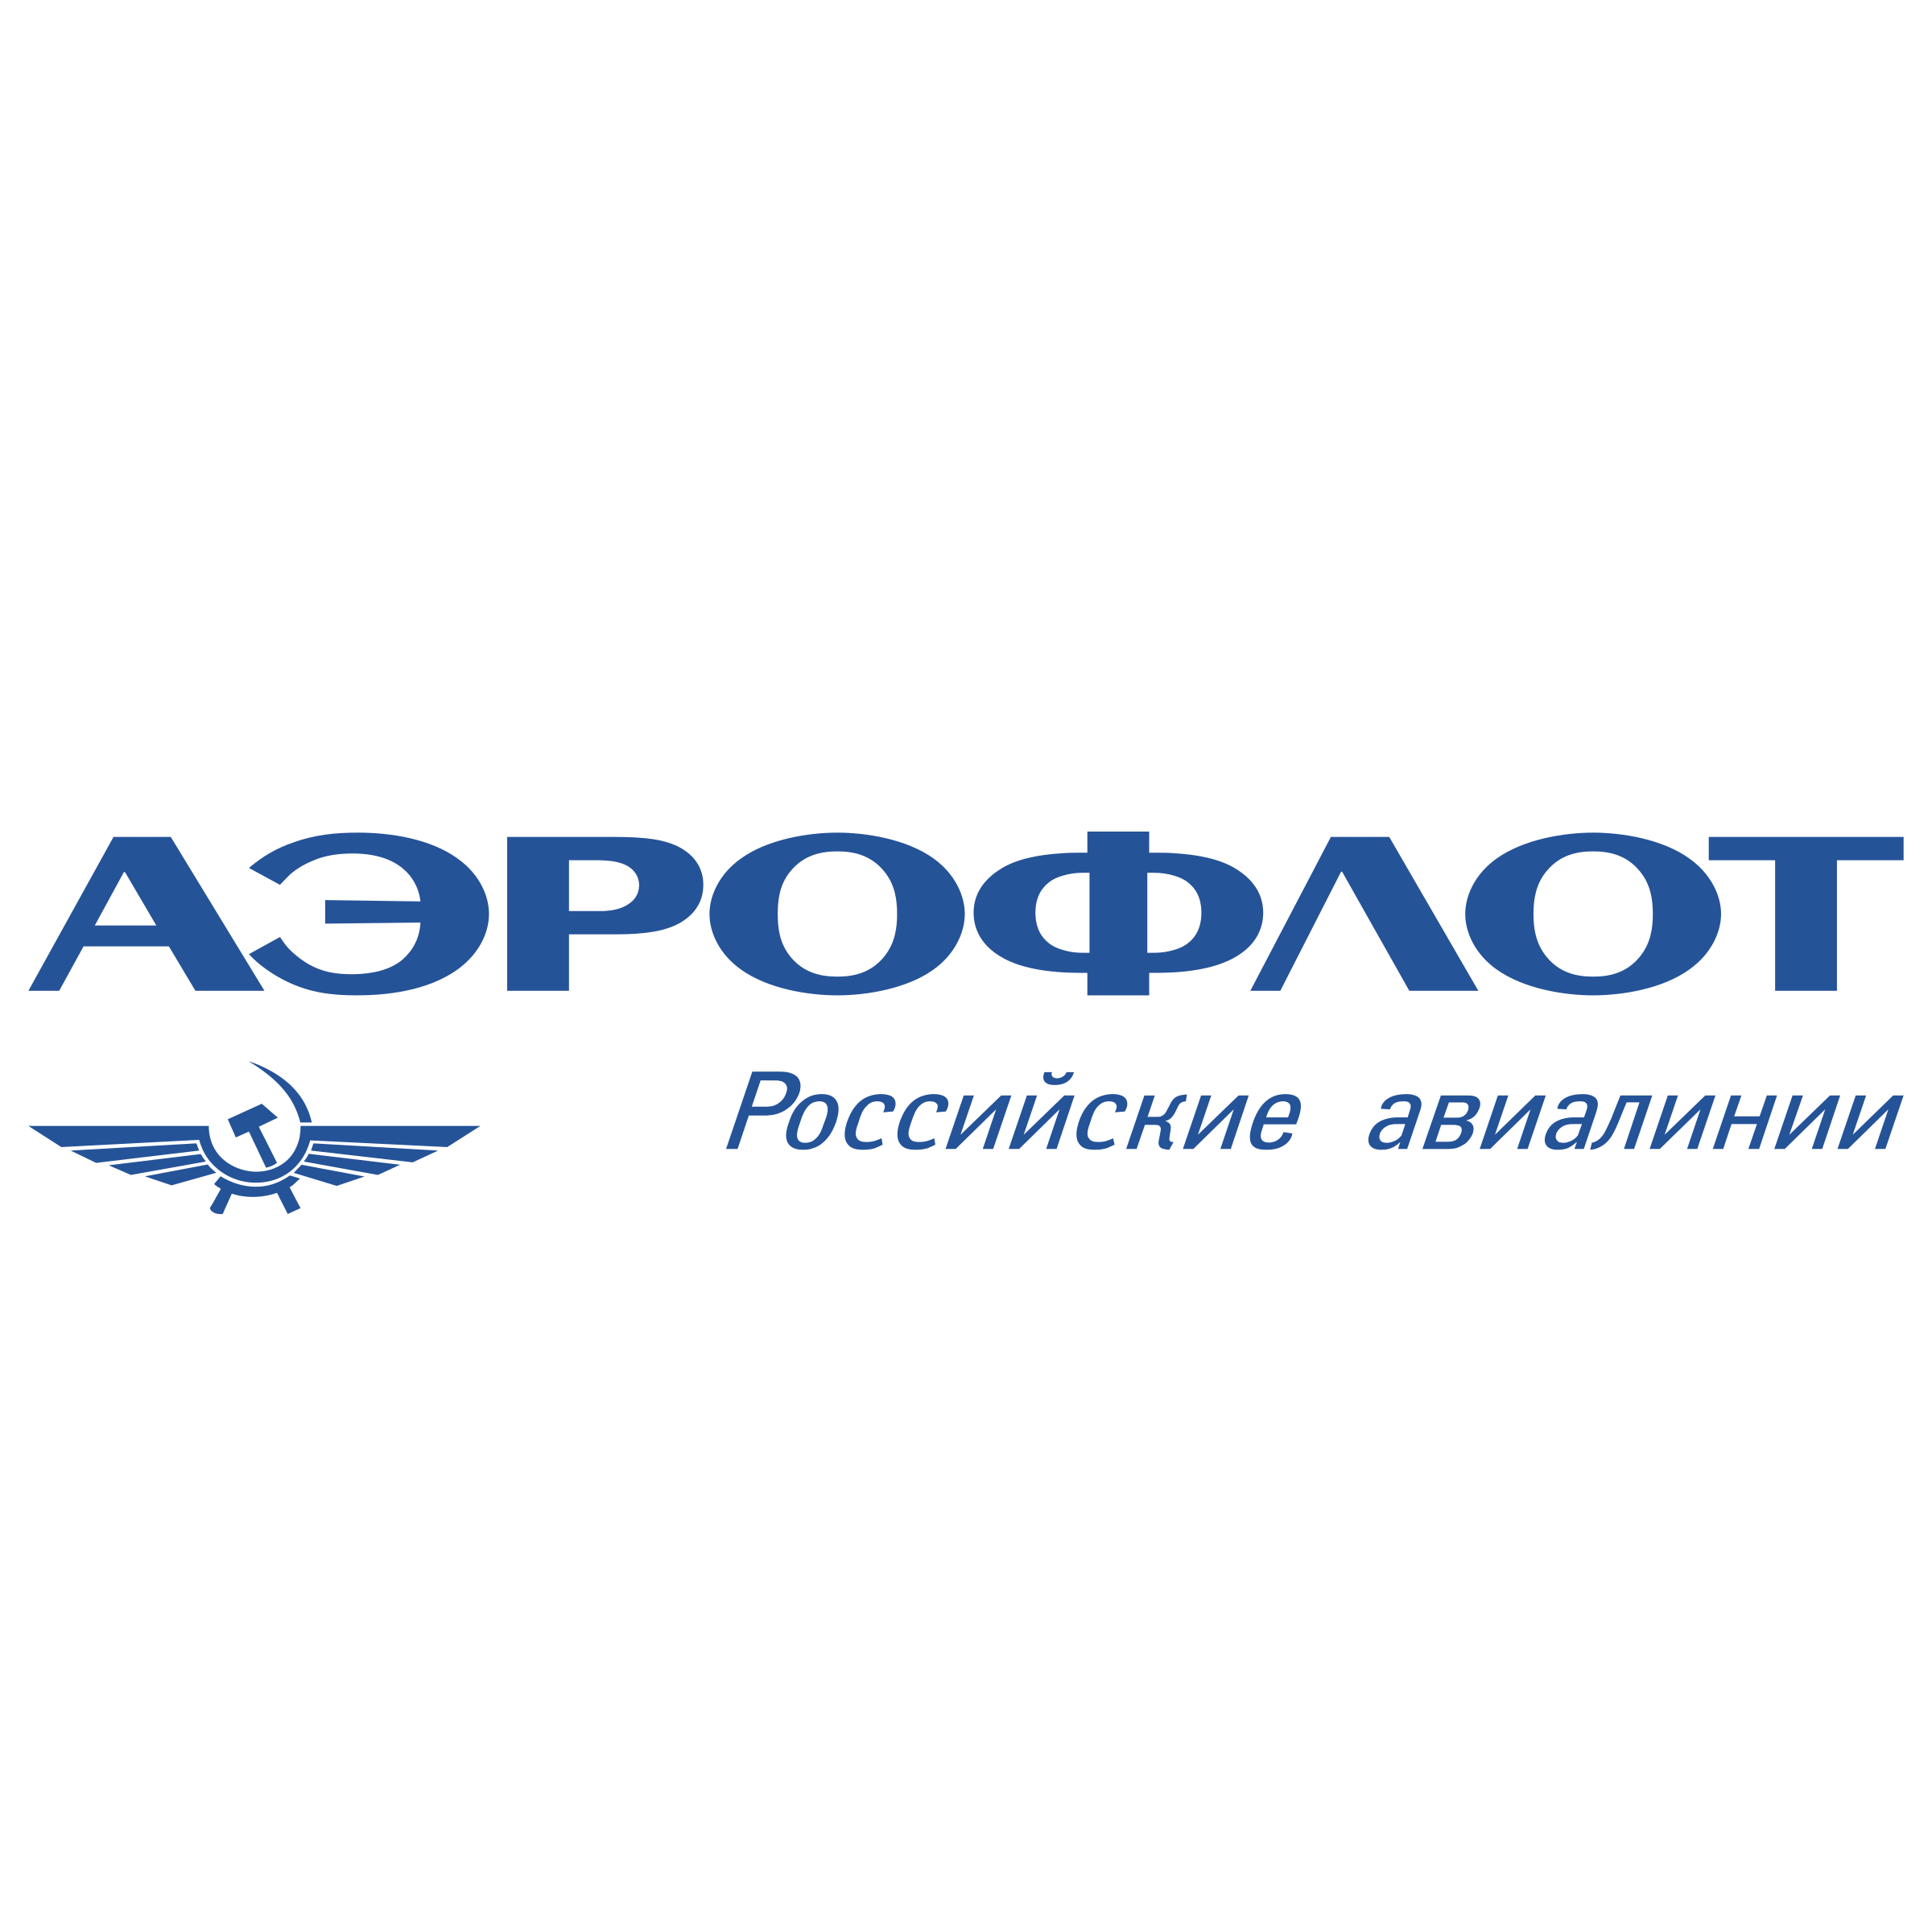 Russia Airline Logo - Aeroflot Russian Airlines Logo PNG Transparent & SVG Vector